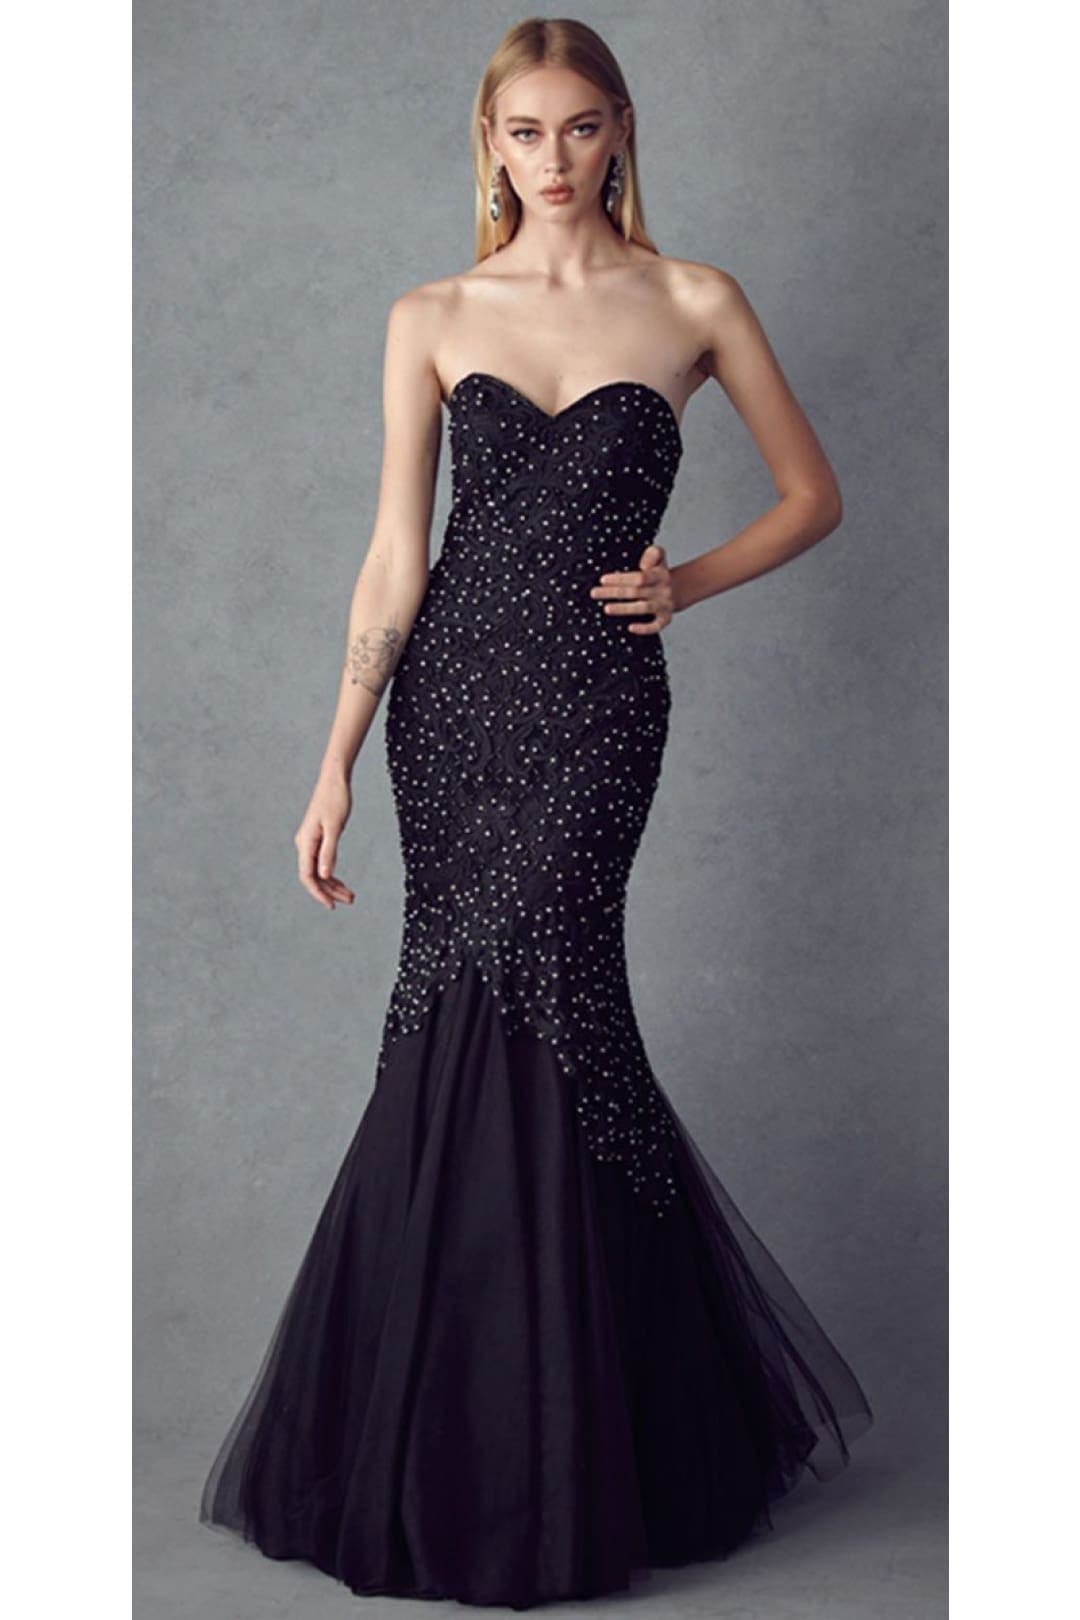 Special Occasion Mermaid Dress - BLACK / XS